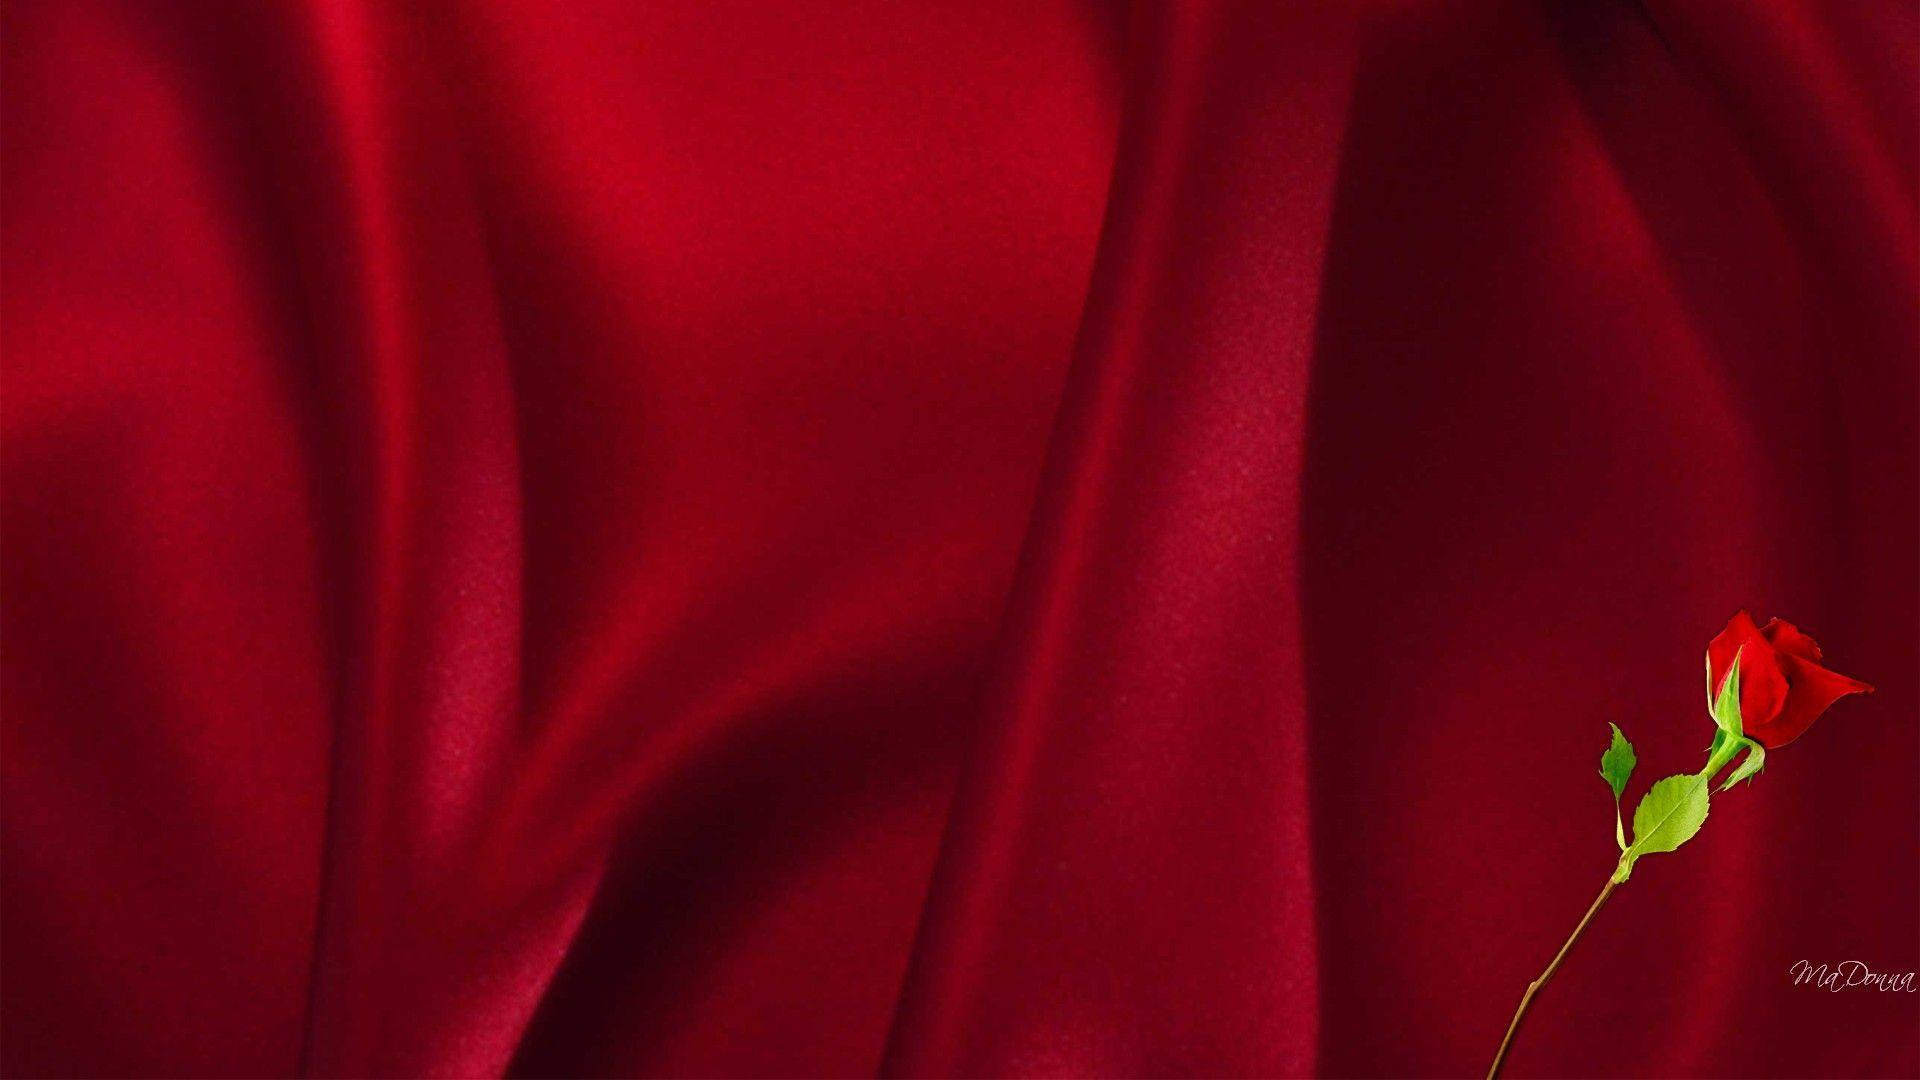 Red Satin Sheets Wallpaper 1920x1080 px Free Download